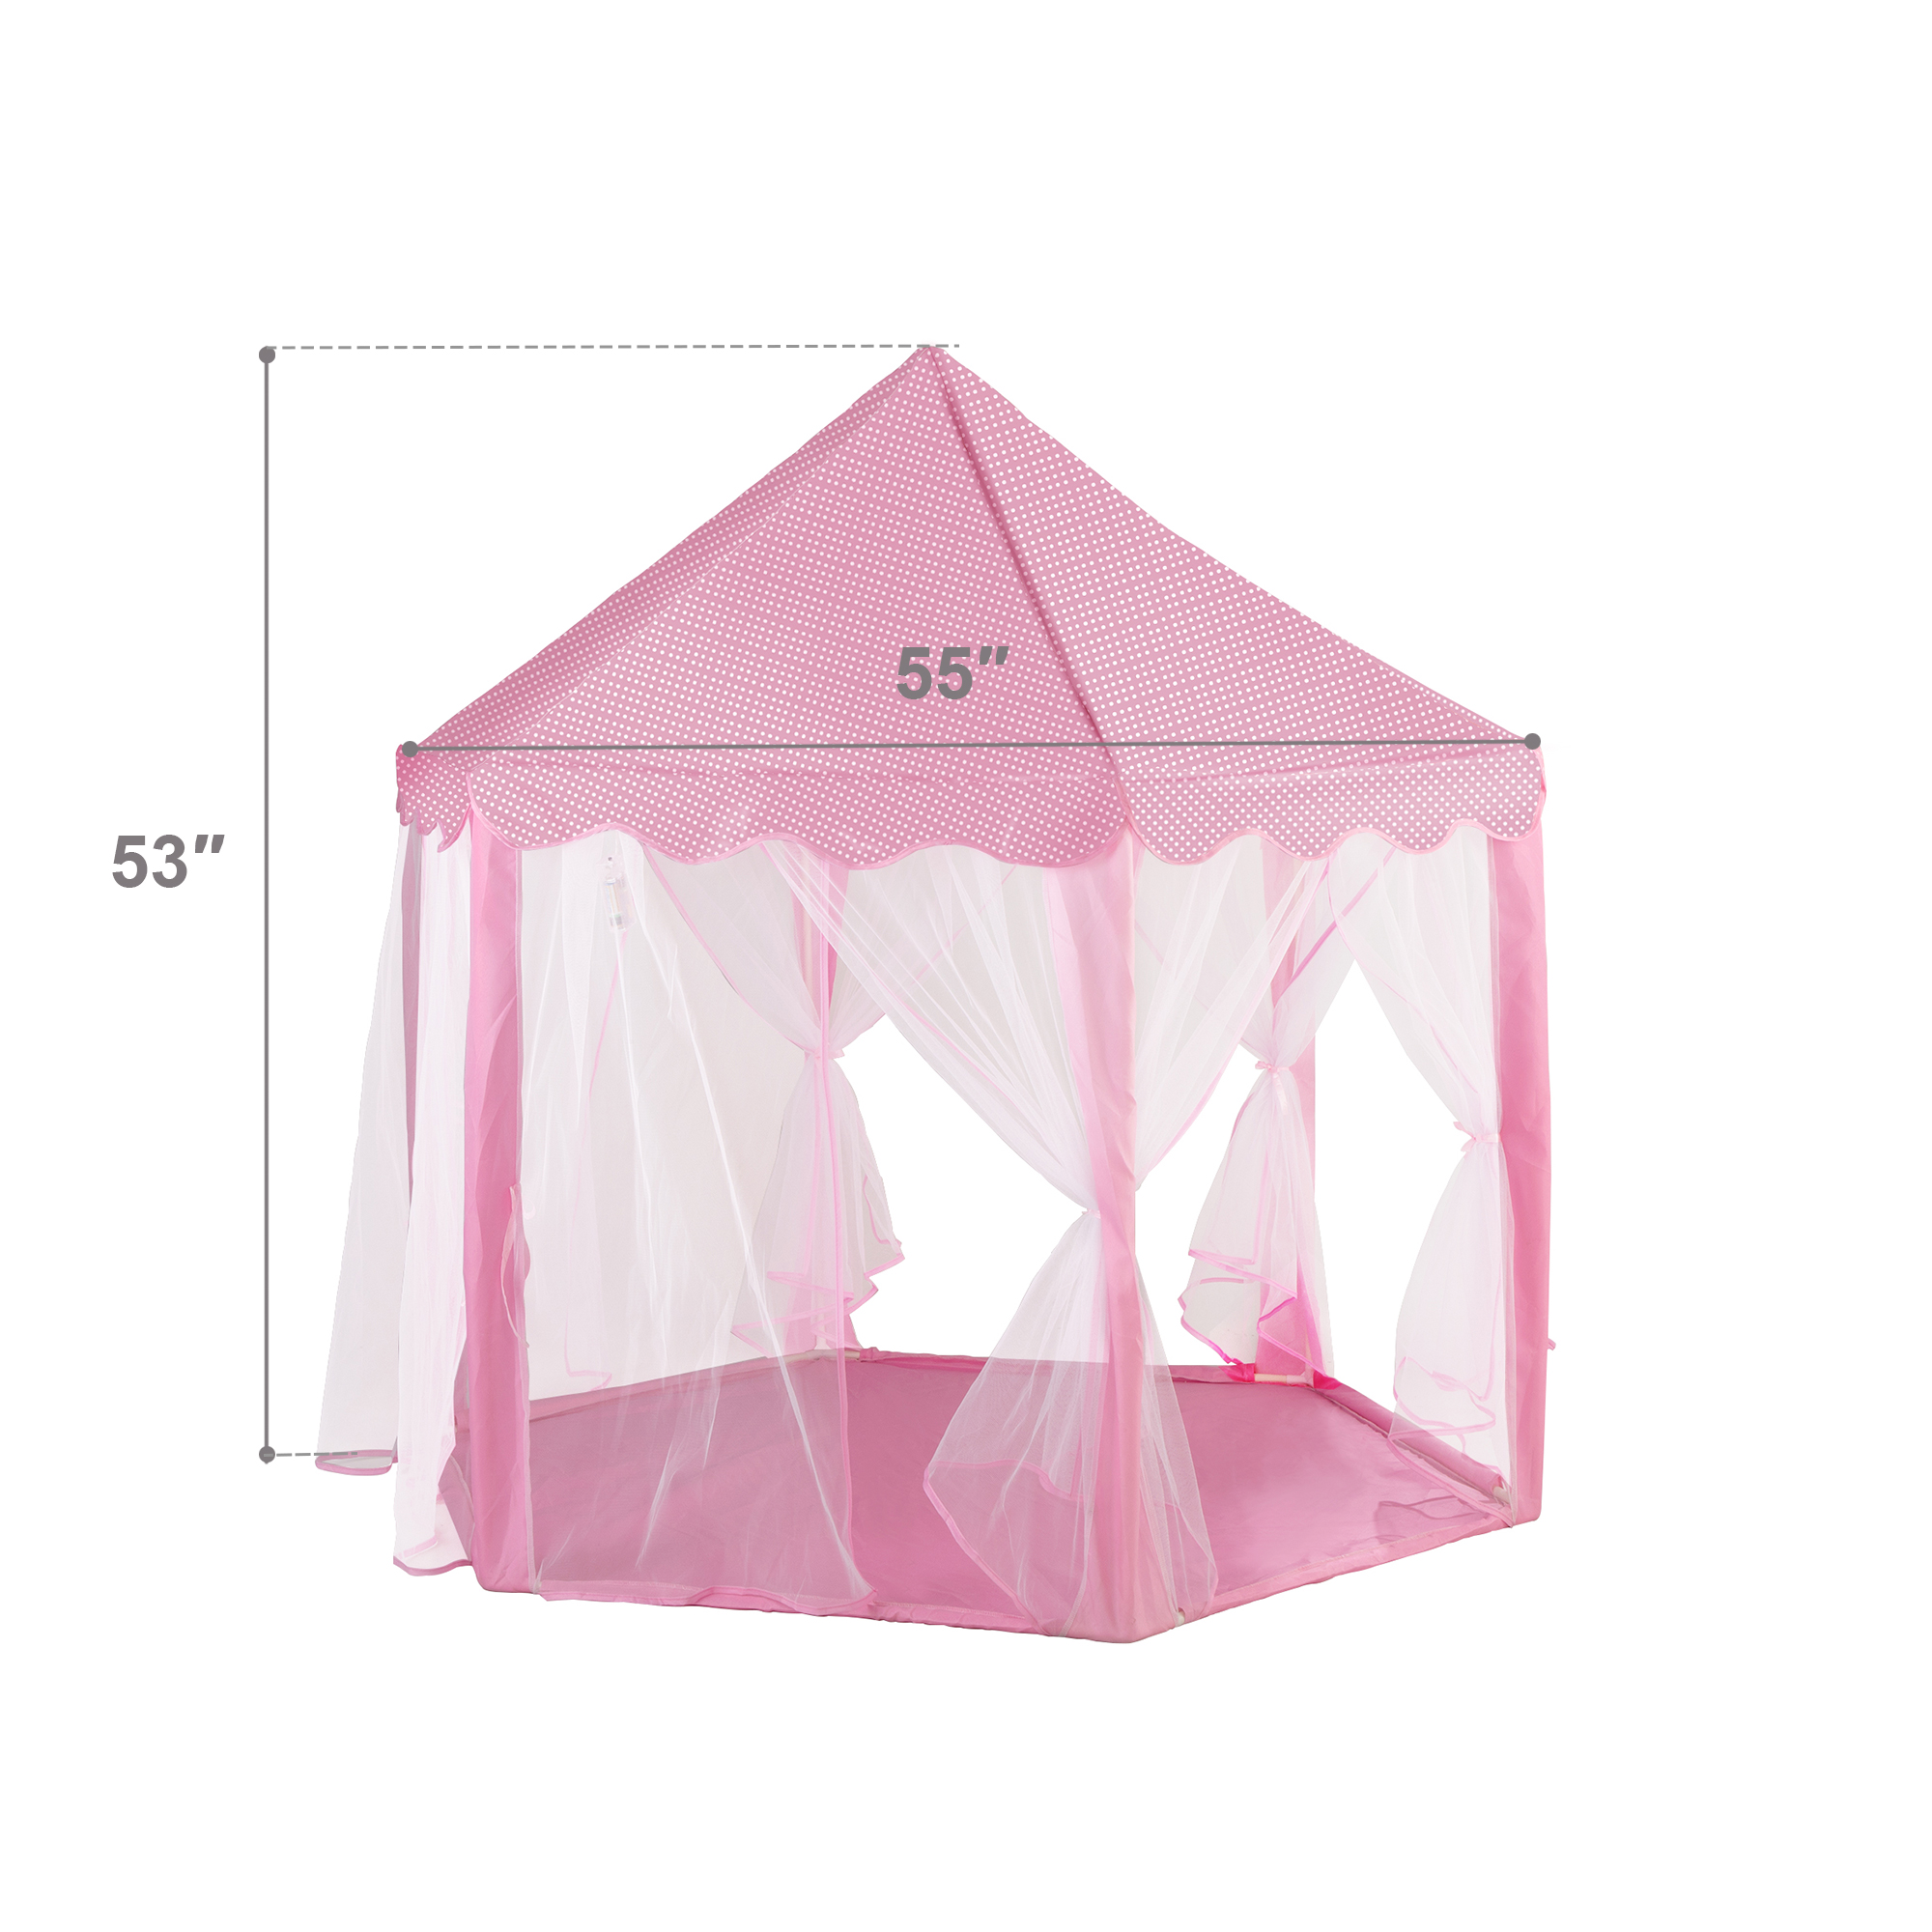 Tobbi Princess Castle Play Tent Kids Play House Pink Play Tent Toy Indoor Outdoor Game house, for Kids Girls Gift, 53"x 55"